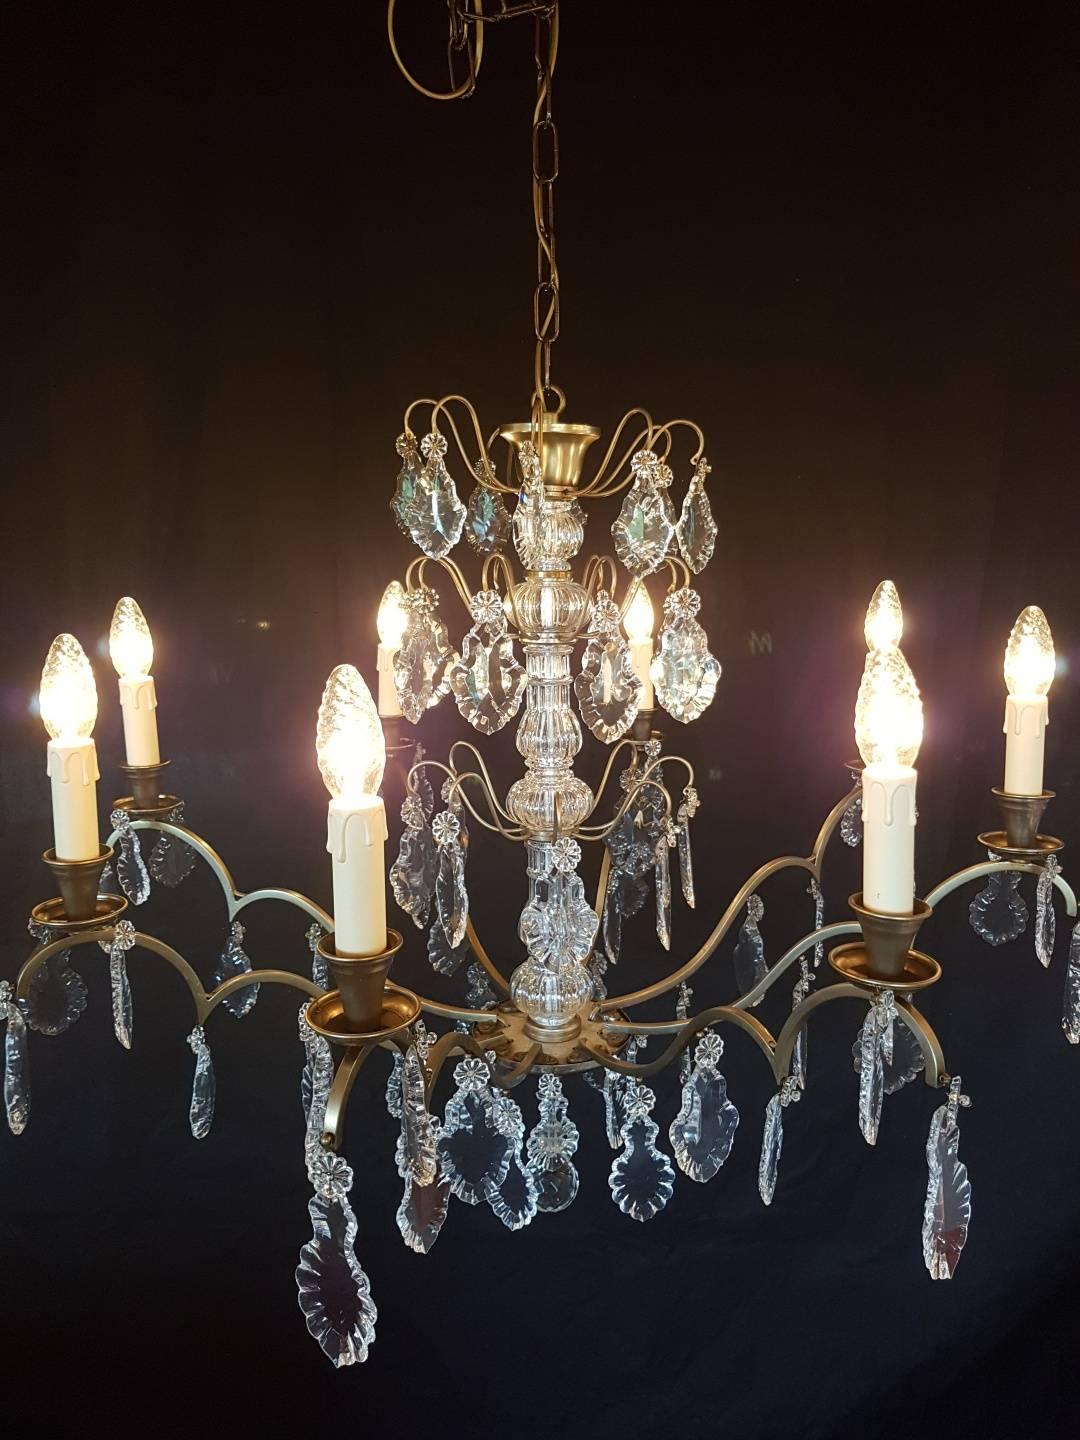 French chandelier with eight lights. Color between bronze and silver. Characteristic French glass in the centre. Nice because of it's simplicity.

This is just one of our large collection chandeliers. Besides the old and antique chandeliers we